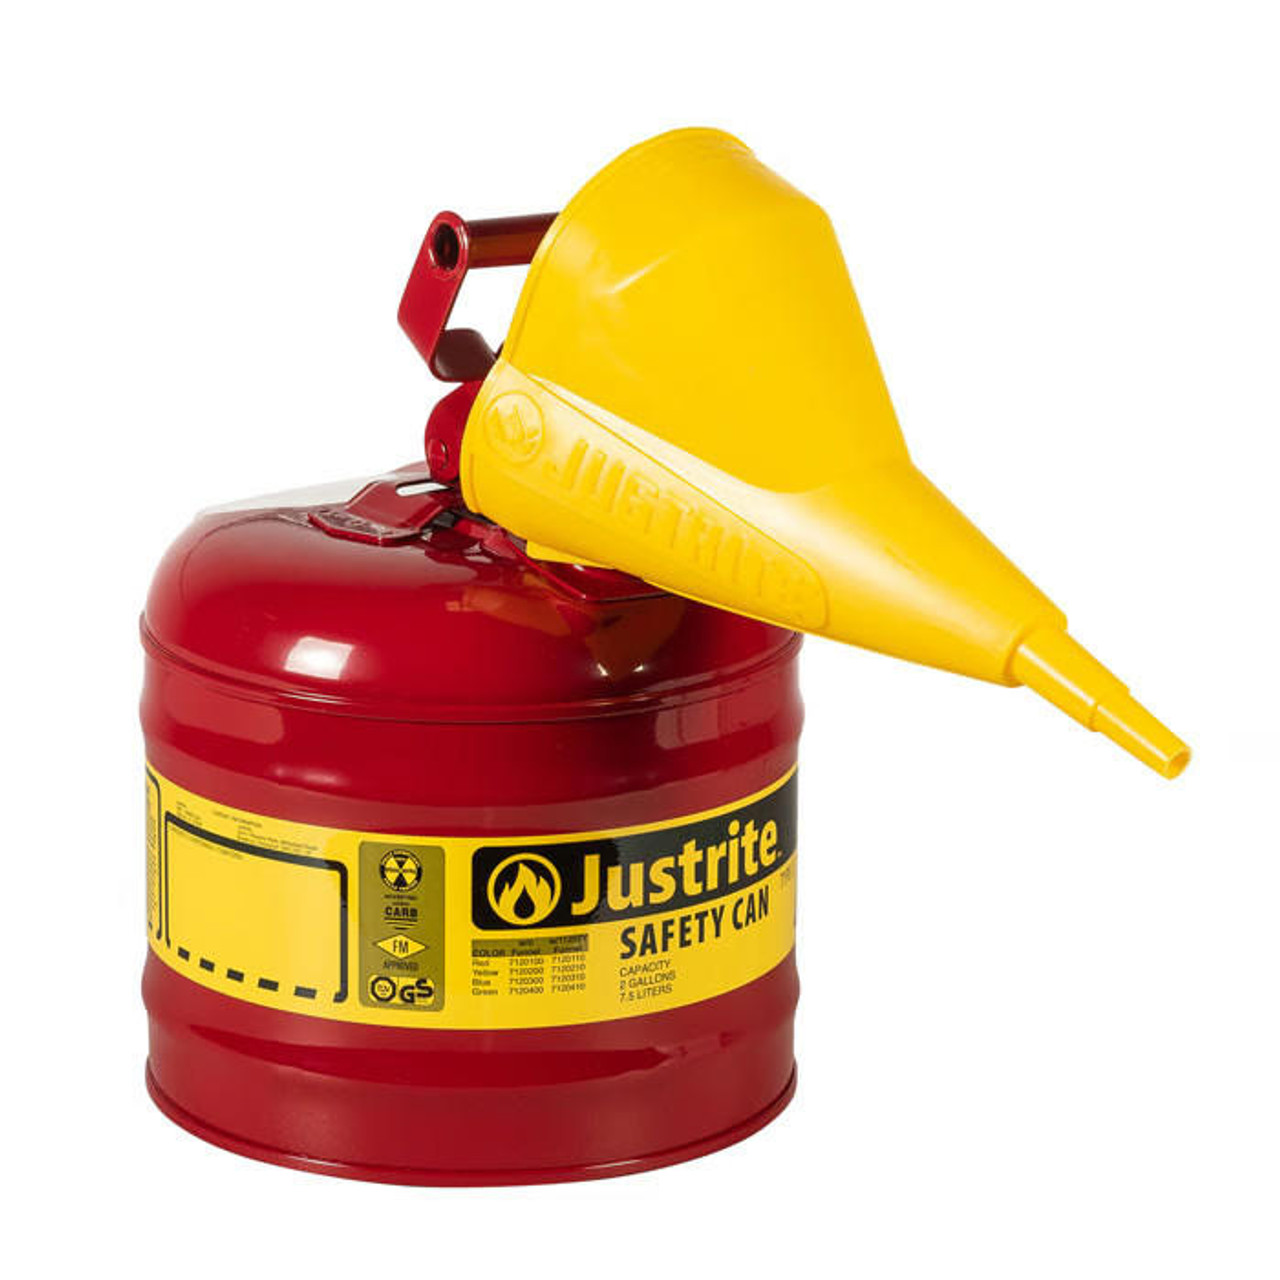 JUSTRITE 2 GAL TYPE I SAFETY CAN FUNNEL - Type I Safety Can